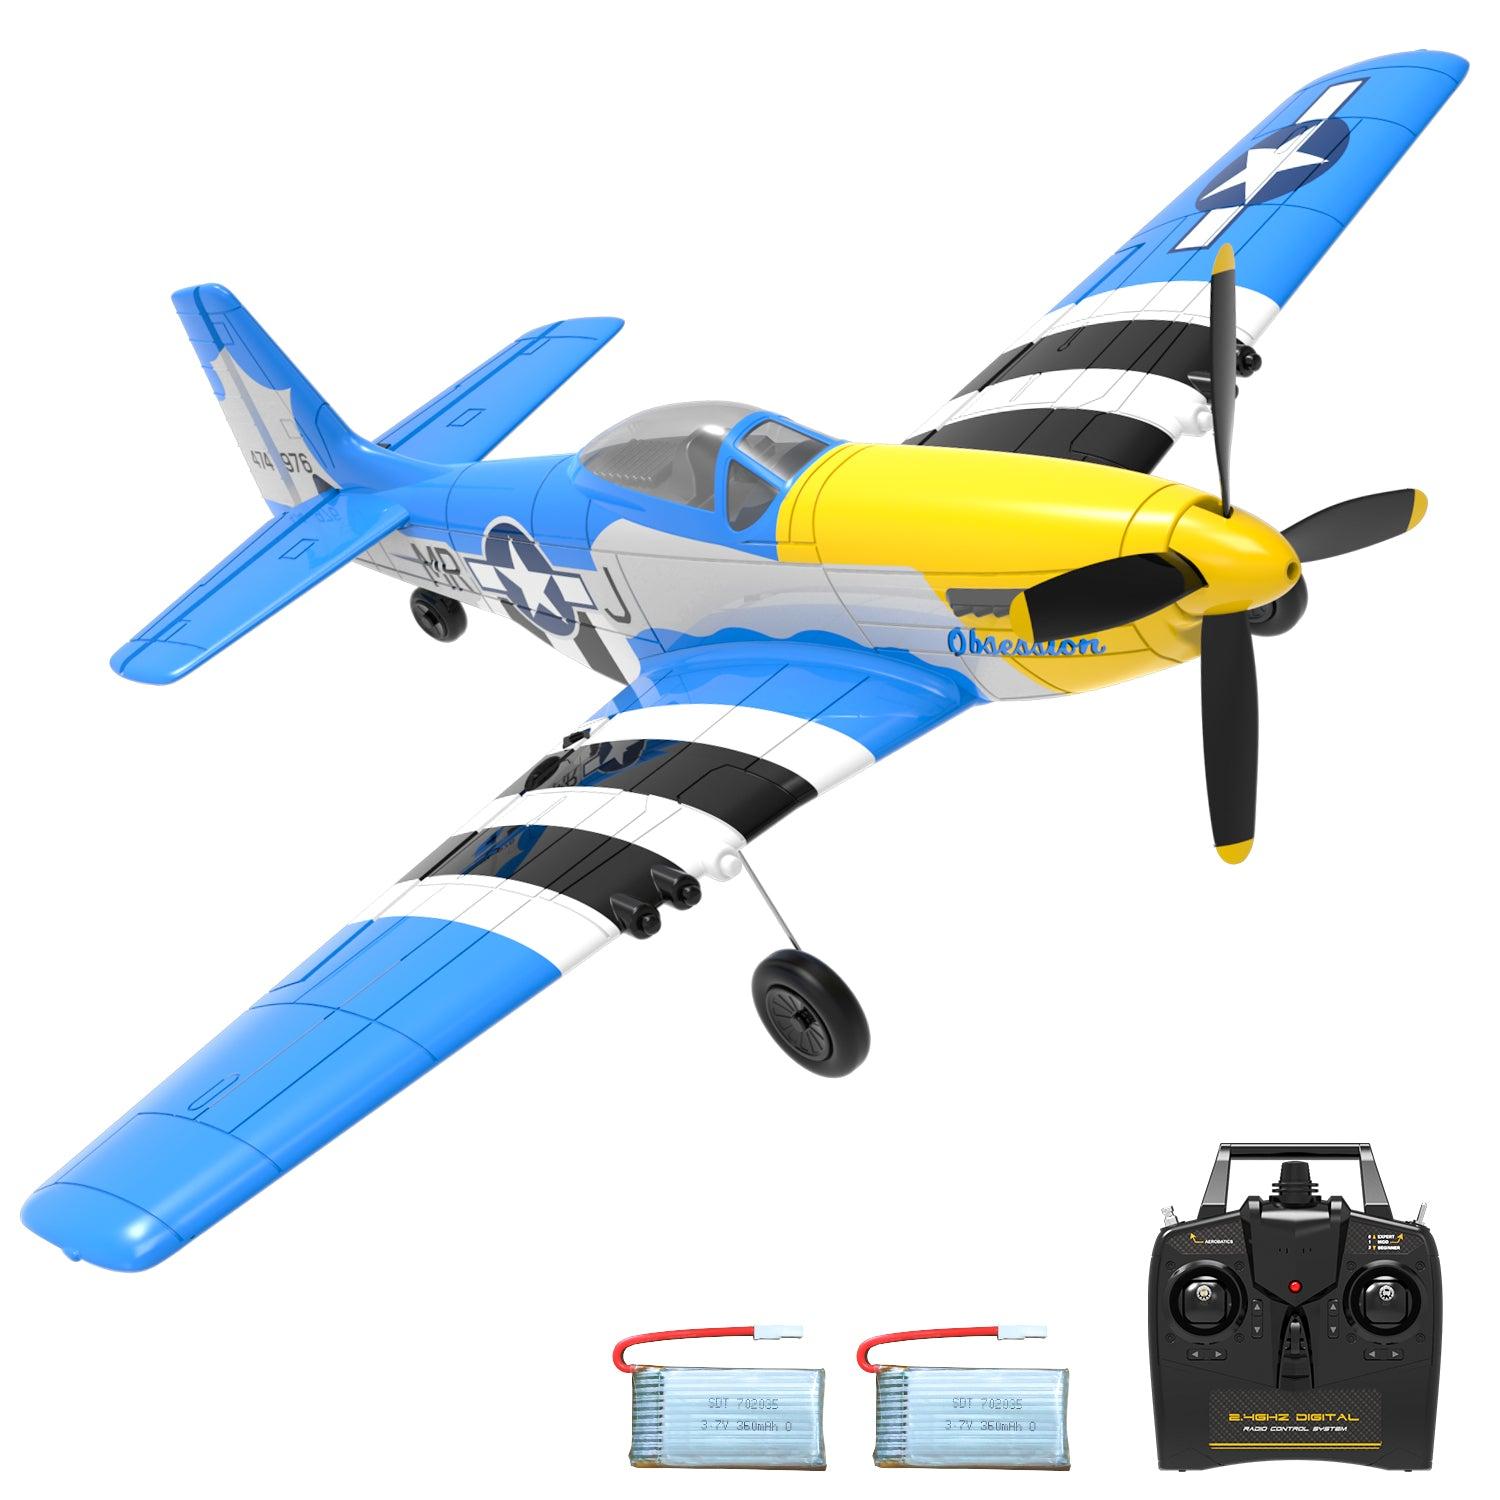 Remote Control Airplanes For Sale: Find Your Perfect Remote Control Airplane!